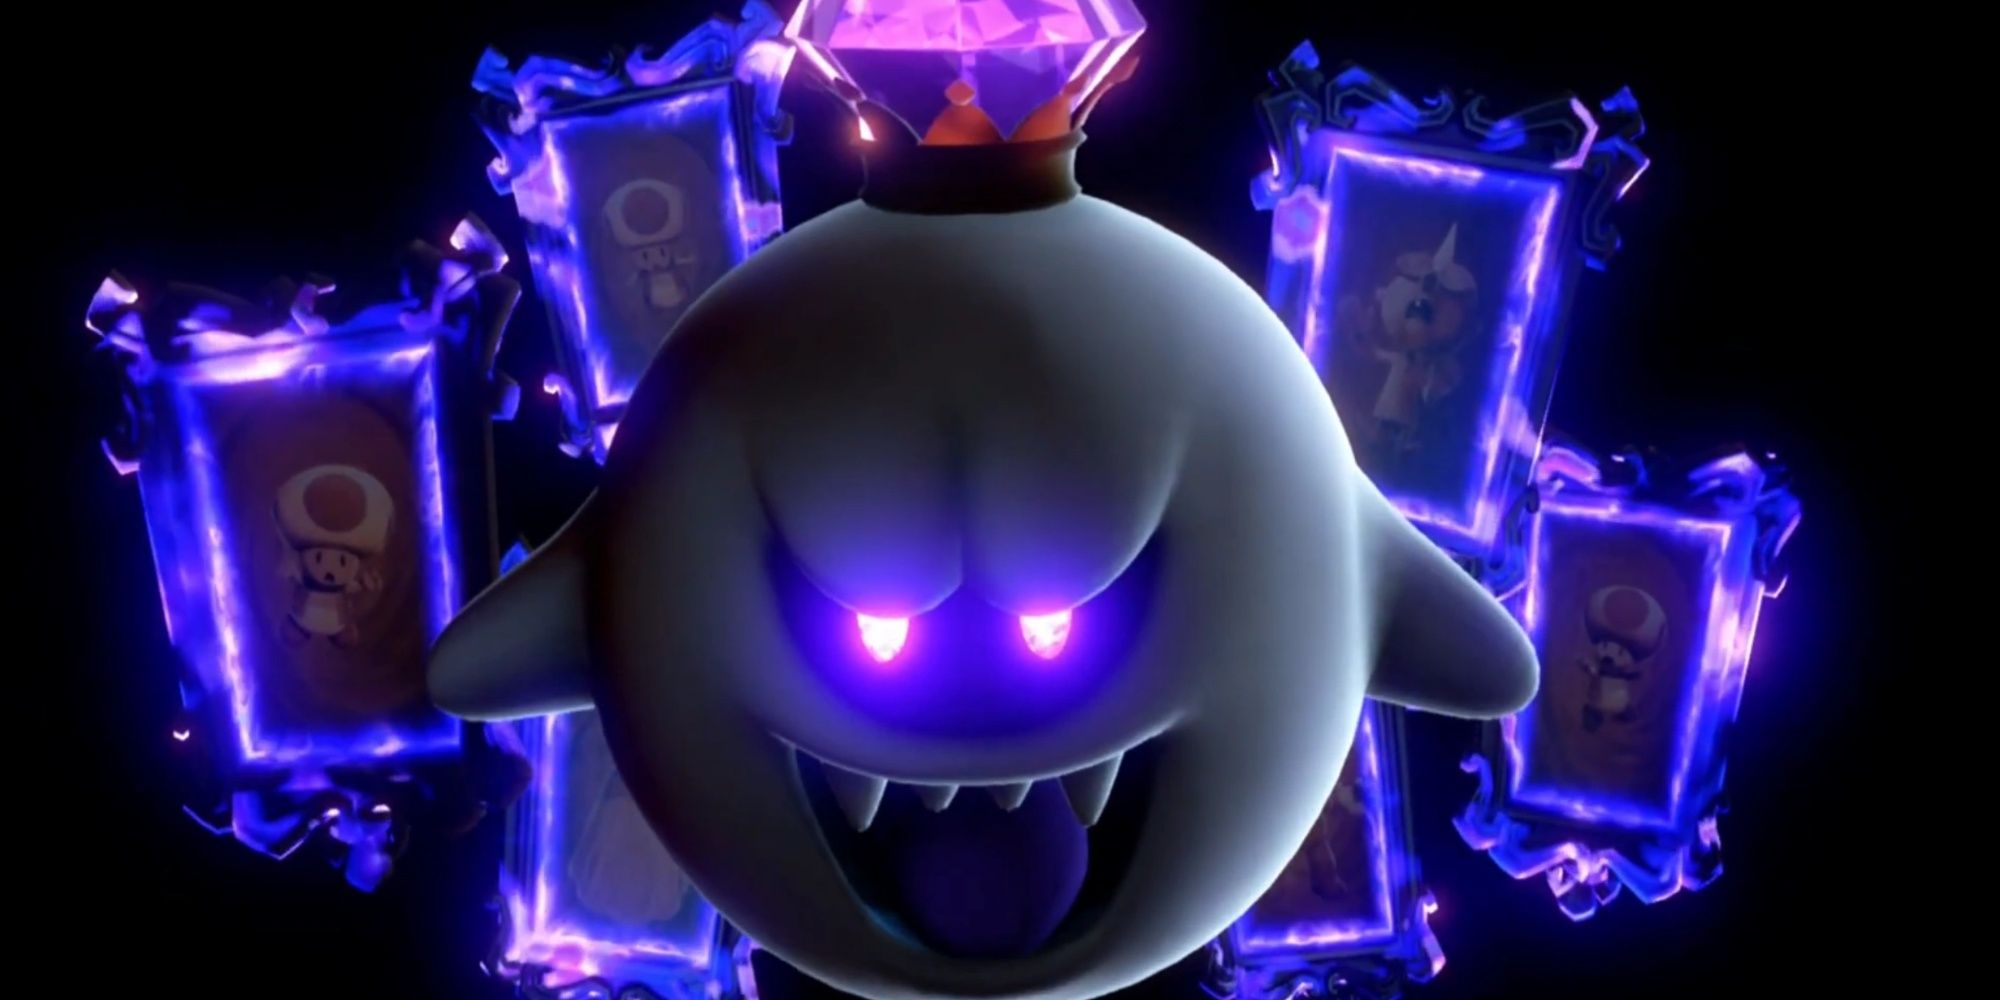 King Boo Floating With Several Portraits Behind Him